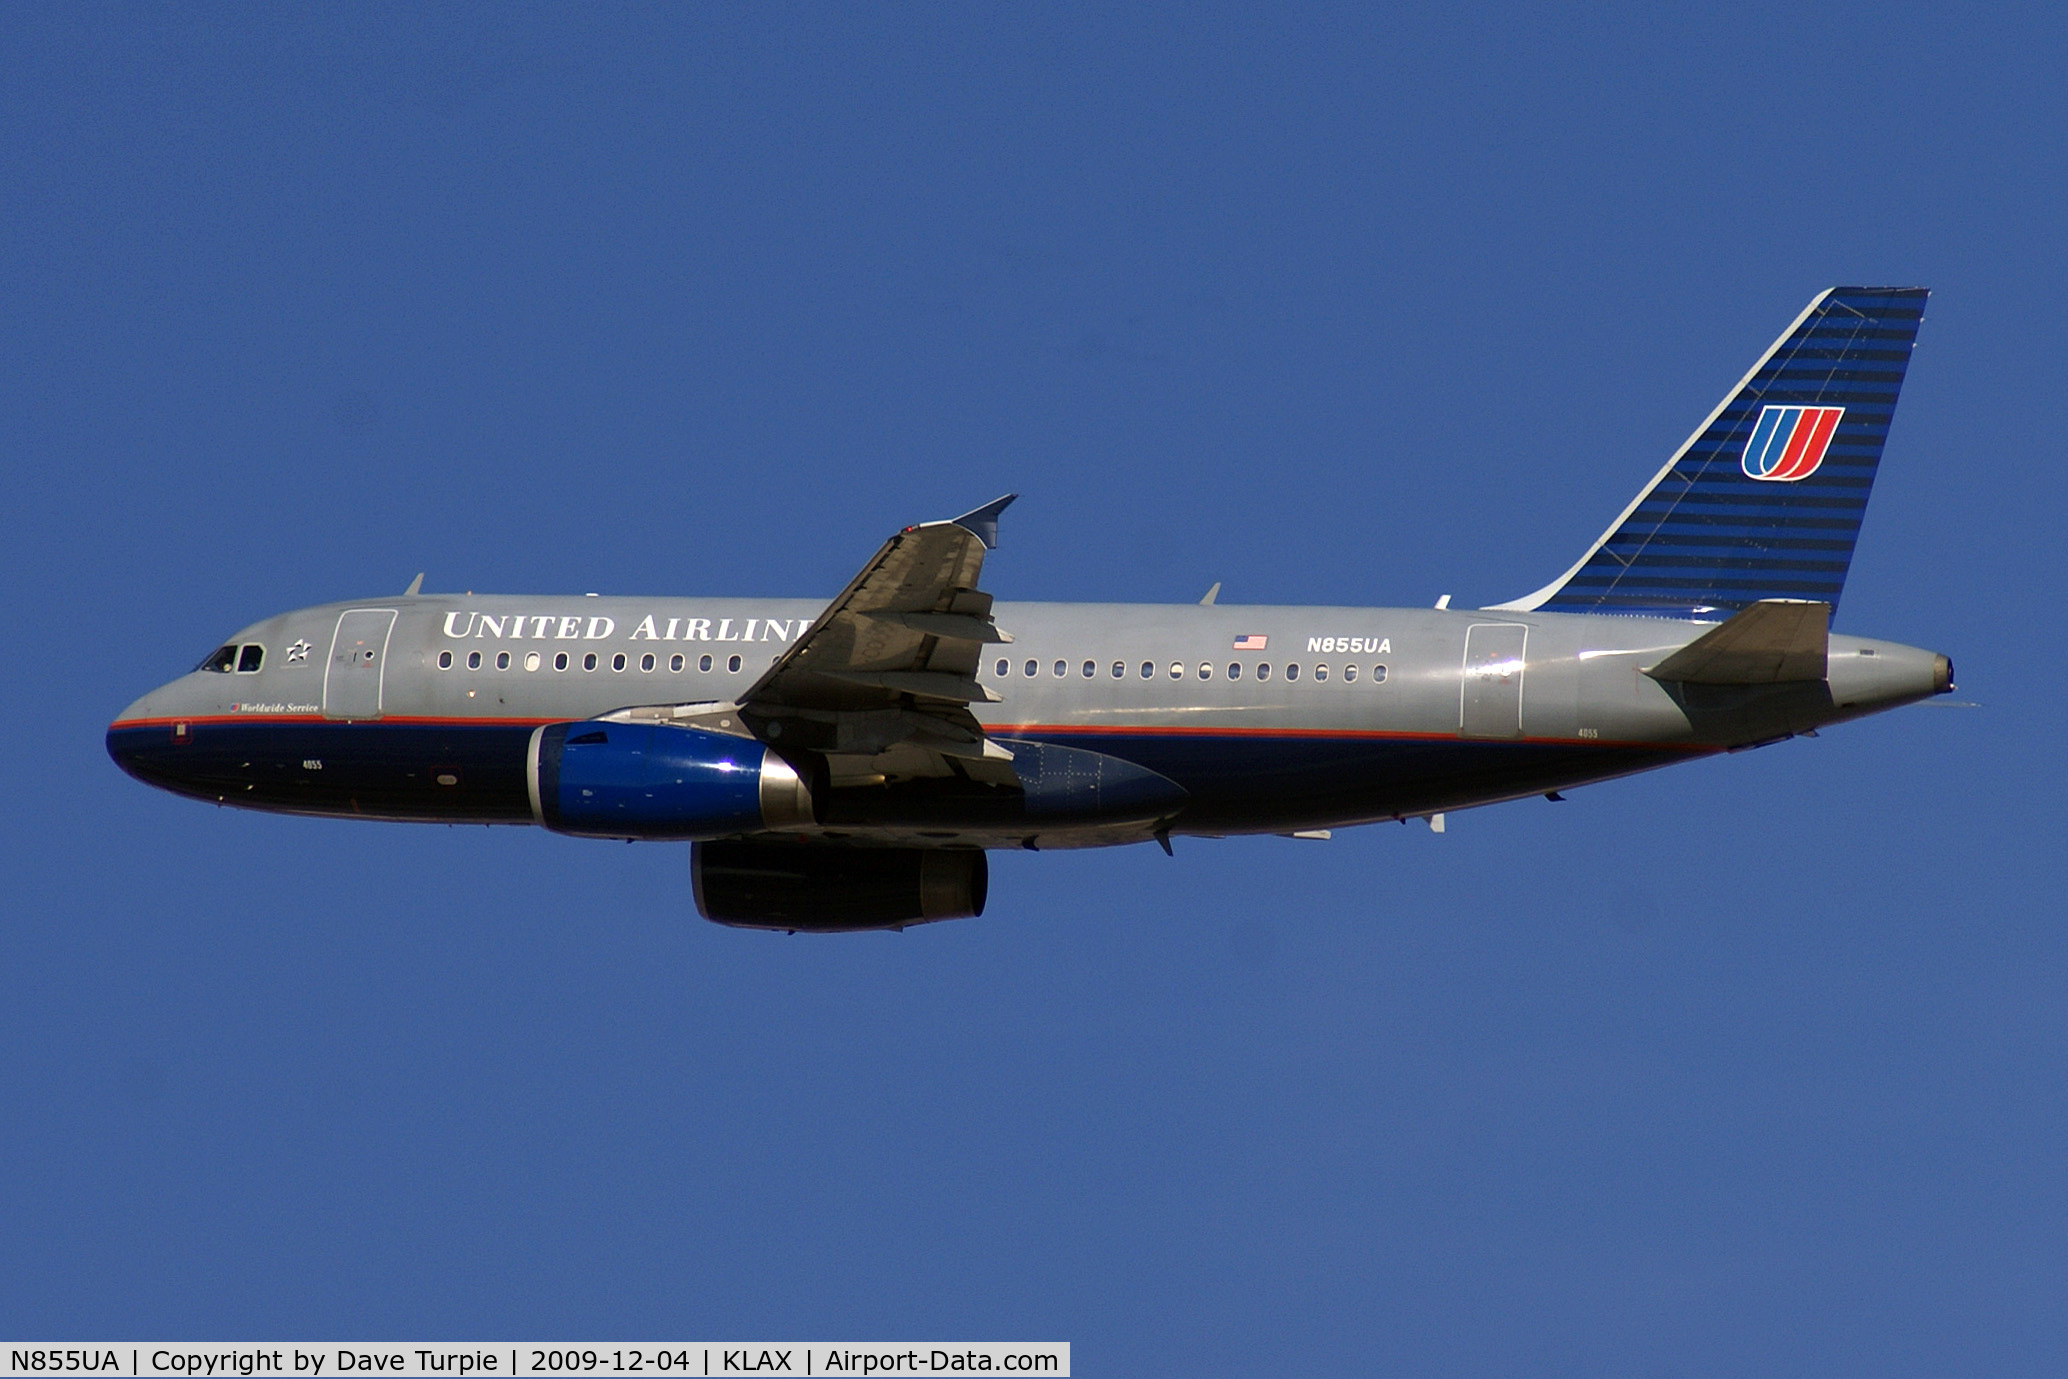 N855UA, 2002 Airbus A319-131 C/N 1737, No comment.